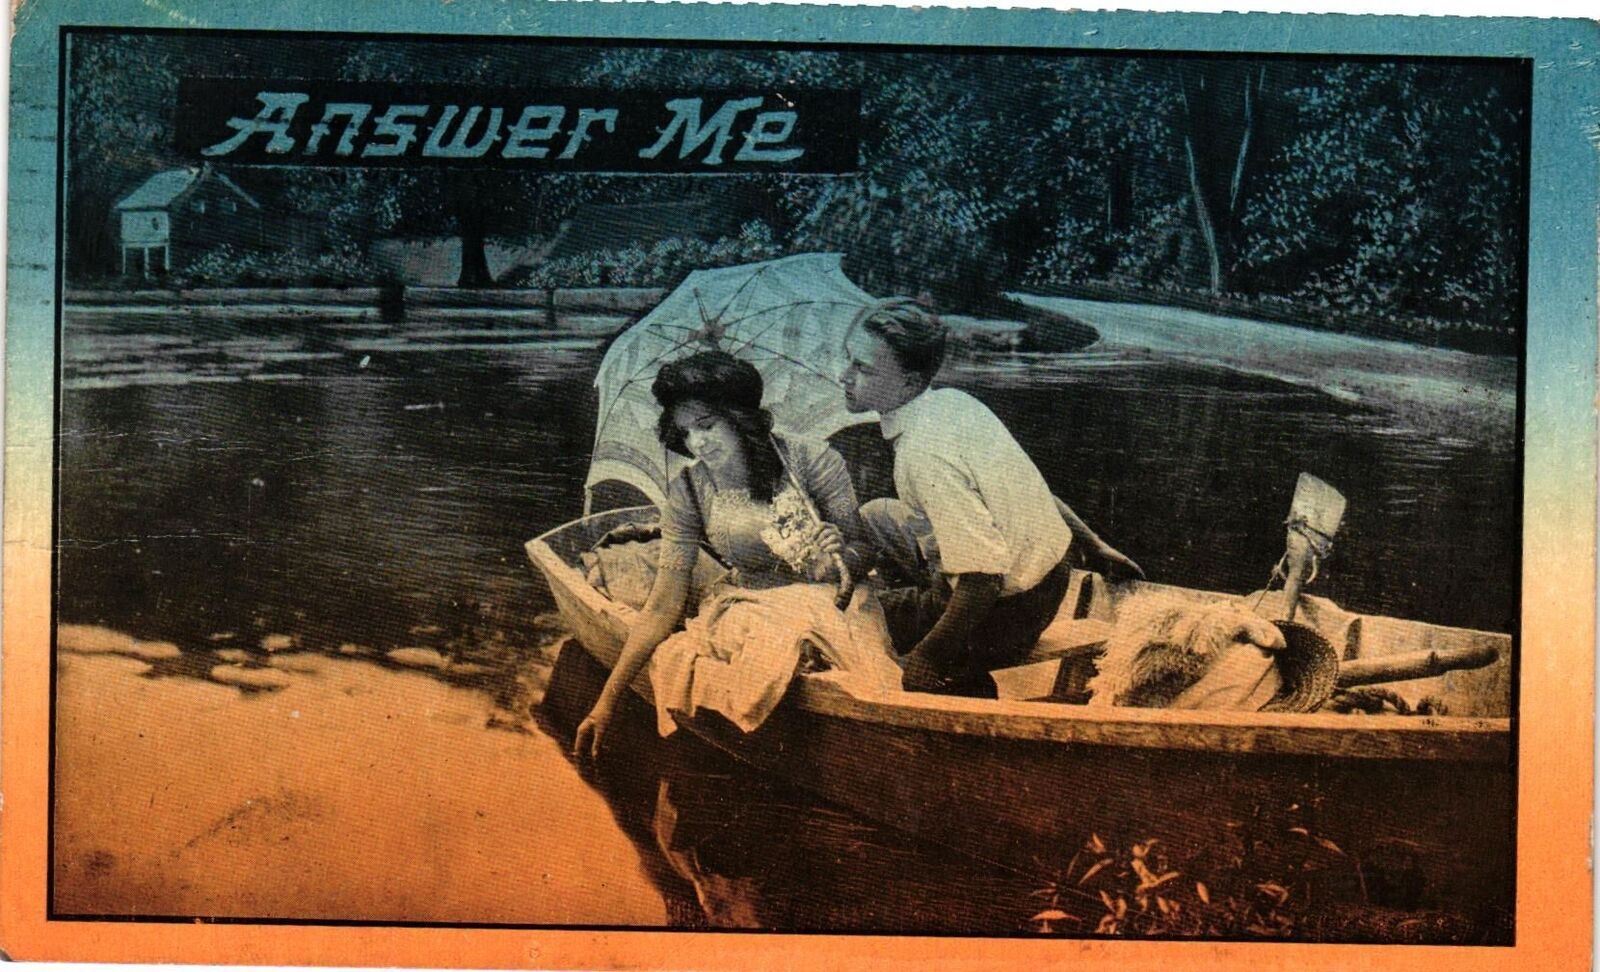 Vintage Postcard- ROMANTIC, ANSWER ME, COUPLE IN A BOAT Posted 1910